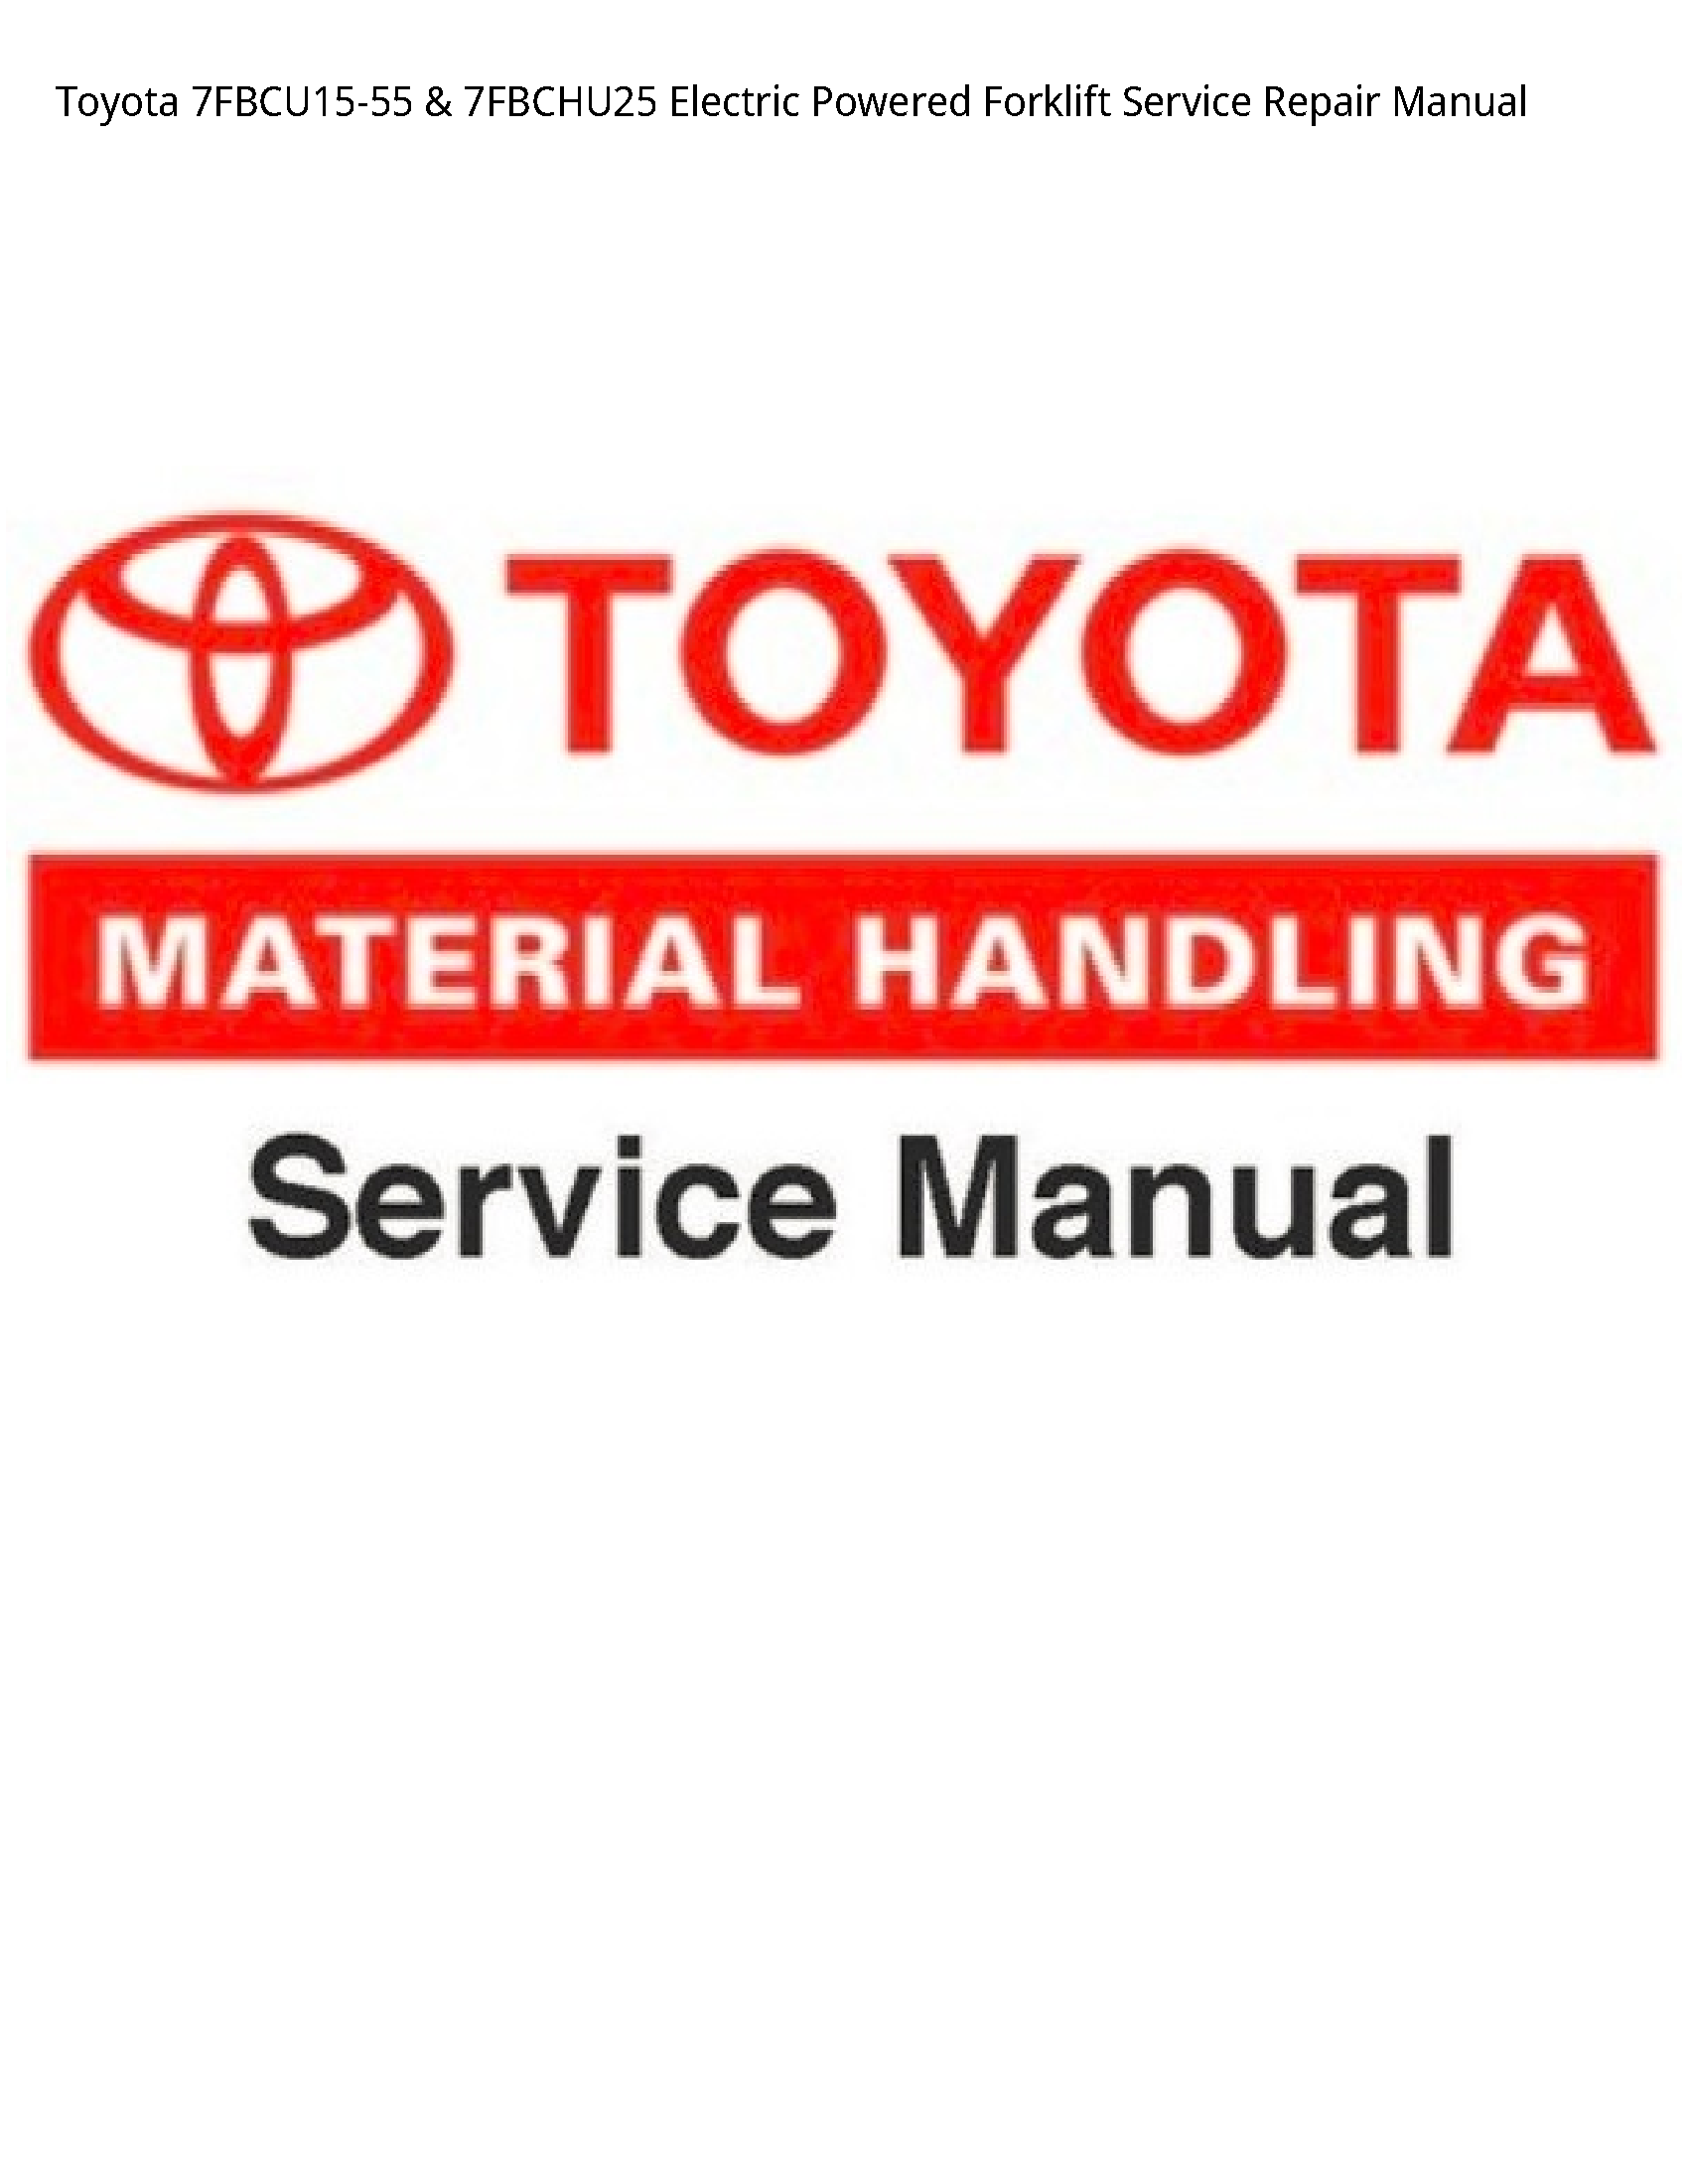 Toyota 7FBCU15-55 Electric Powered Forklift manual